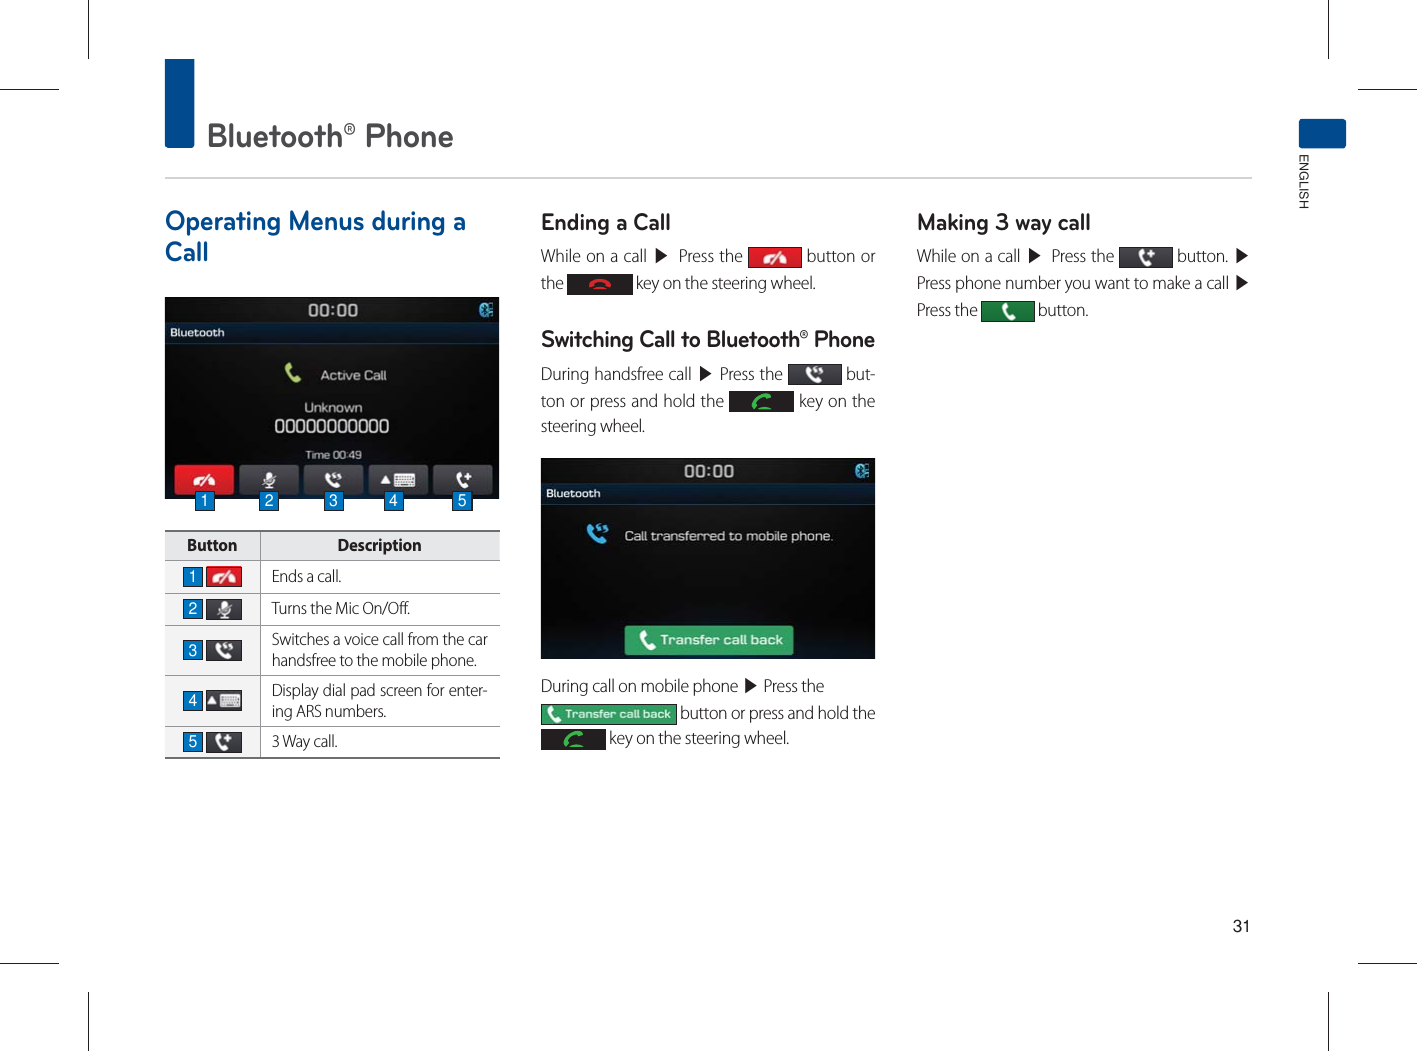 Bluetooth® PhoneENGLISHOperating Menus during a CallButton Description1 Ends a call.2 Turns the Mic On/Off.  3 Switches a voice call from the car handsfree to the mobile phone.4 Display dial pad screen for enter-ing ARS numbers.5 3 Way call. Ending a CallWhile on a call ▶ Press the   button or the   key on the steering wheel.Switching Call to Bluetooth® PhoneDuring handsfree call ▶ Press the   but-ton or press and hold the   key on the steering wheel.During call on mobile phone ▶ Press the  button or press and hold the  key on the steering wheel.Making 3 way callWhile on a call ▶ Press the   button. ▶Press phone number you want to make a call ▶Press the   button.1 2 3 4 5